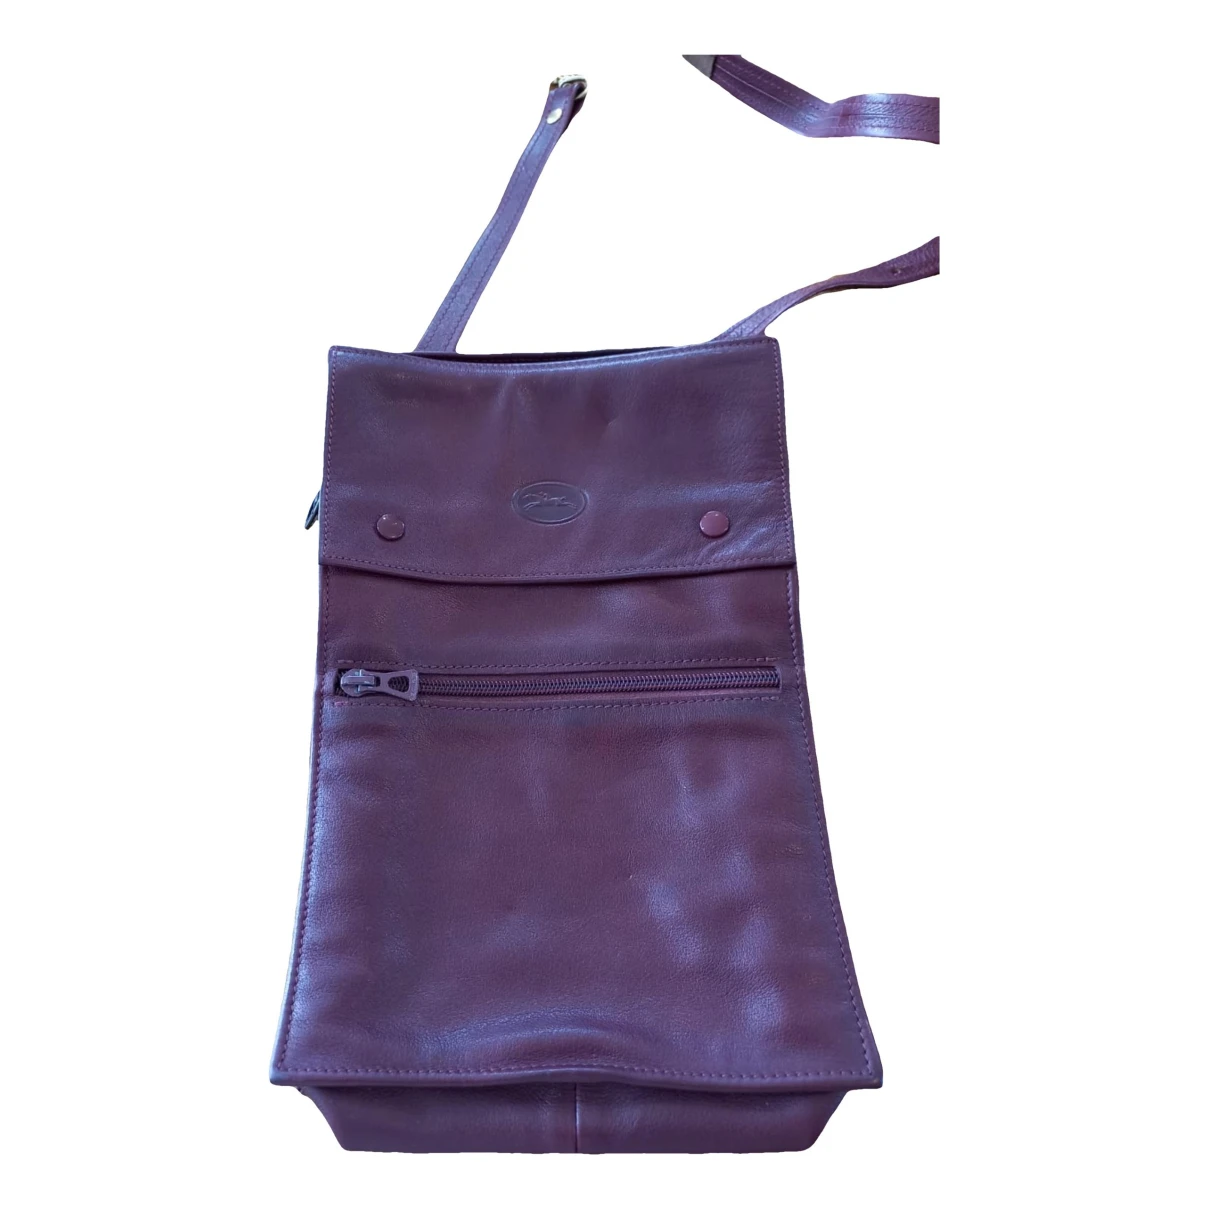 Pre-owned Longchamp Leather Clutch Bag In Burgundy